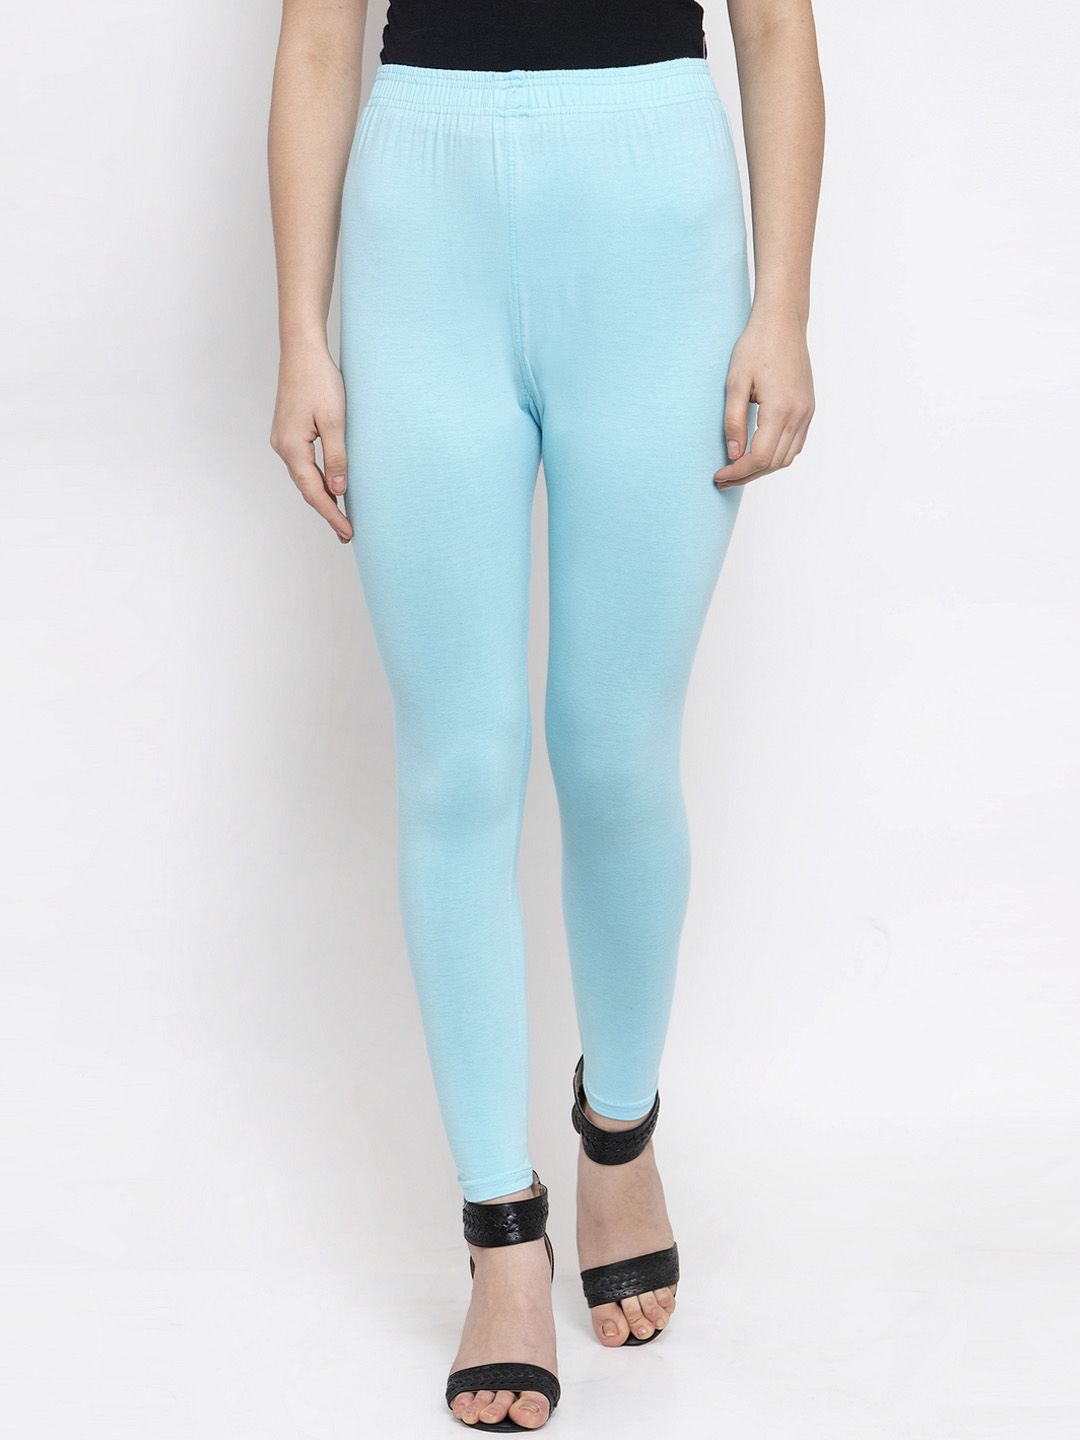 TAG 7 Women Turquoise Blue Solid Ankle-Length Leggings Price in India